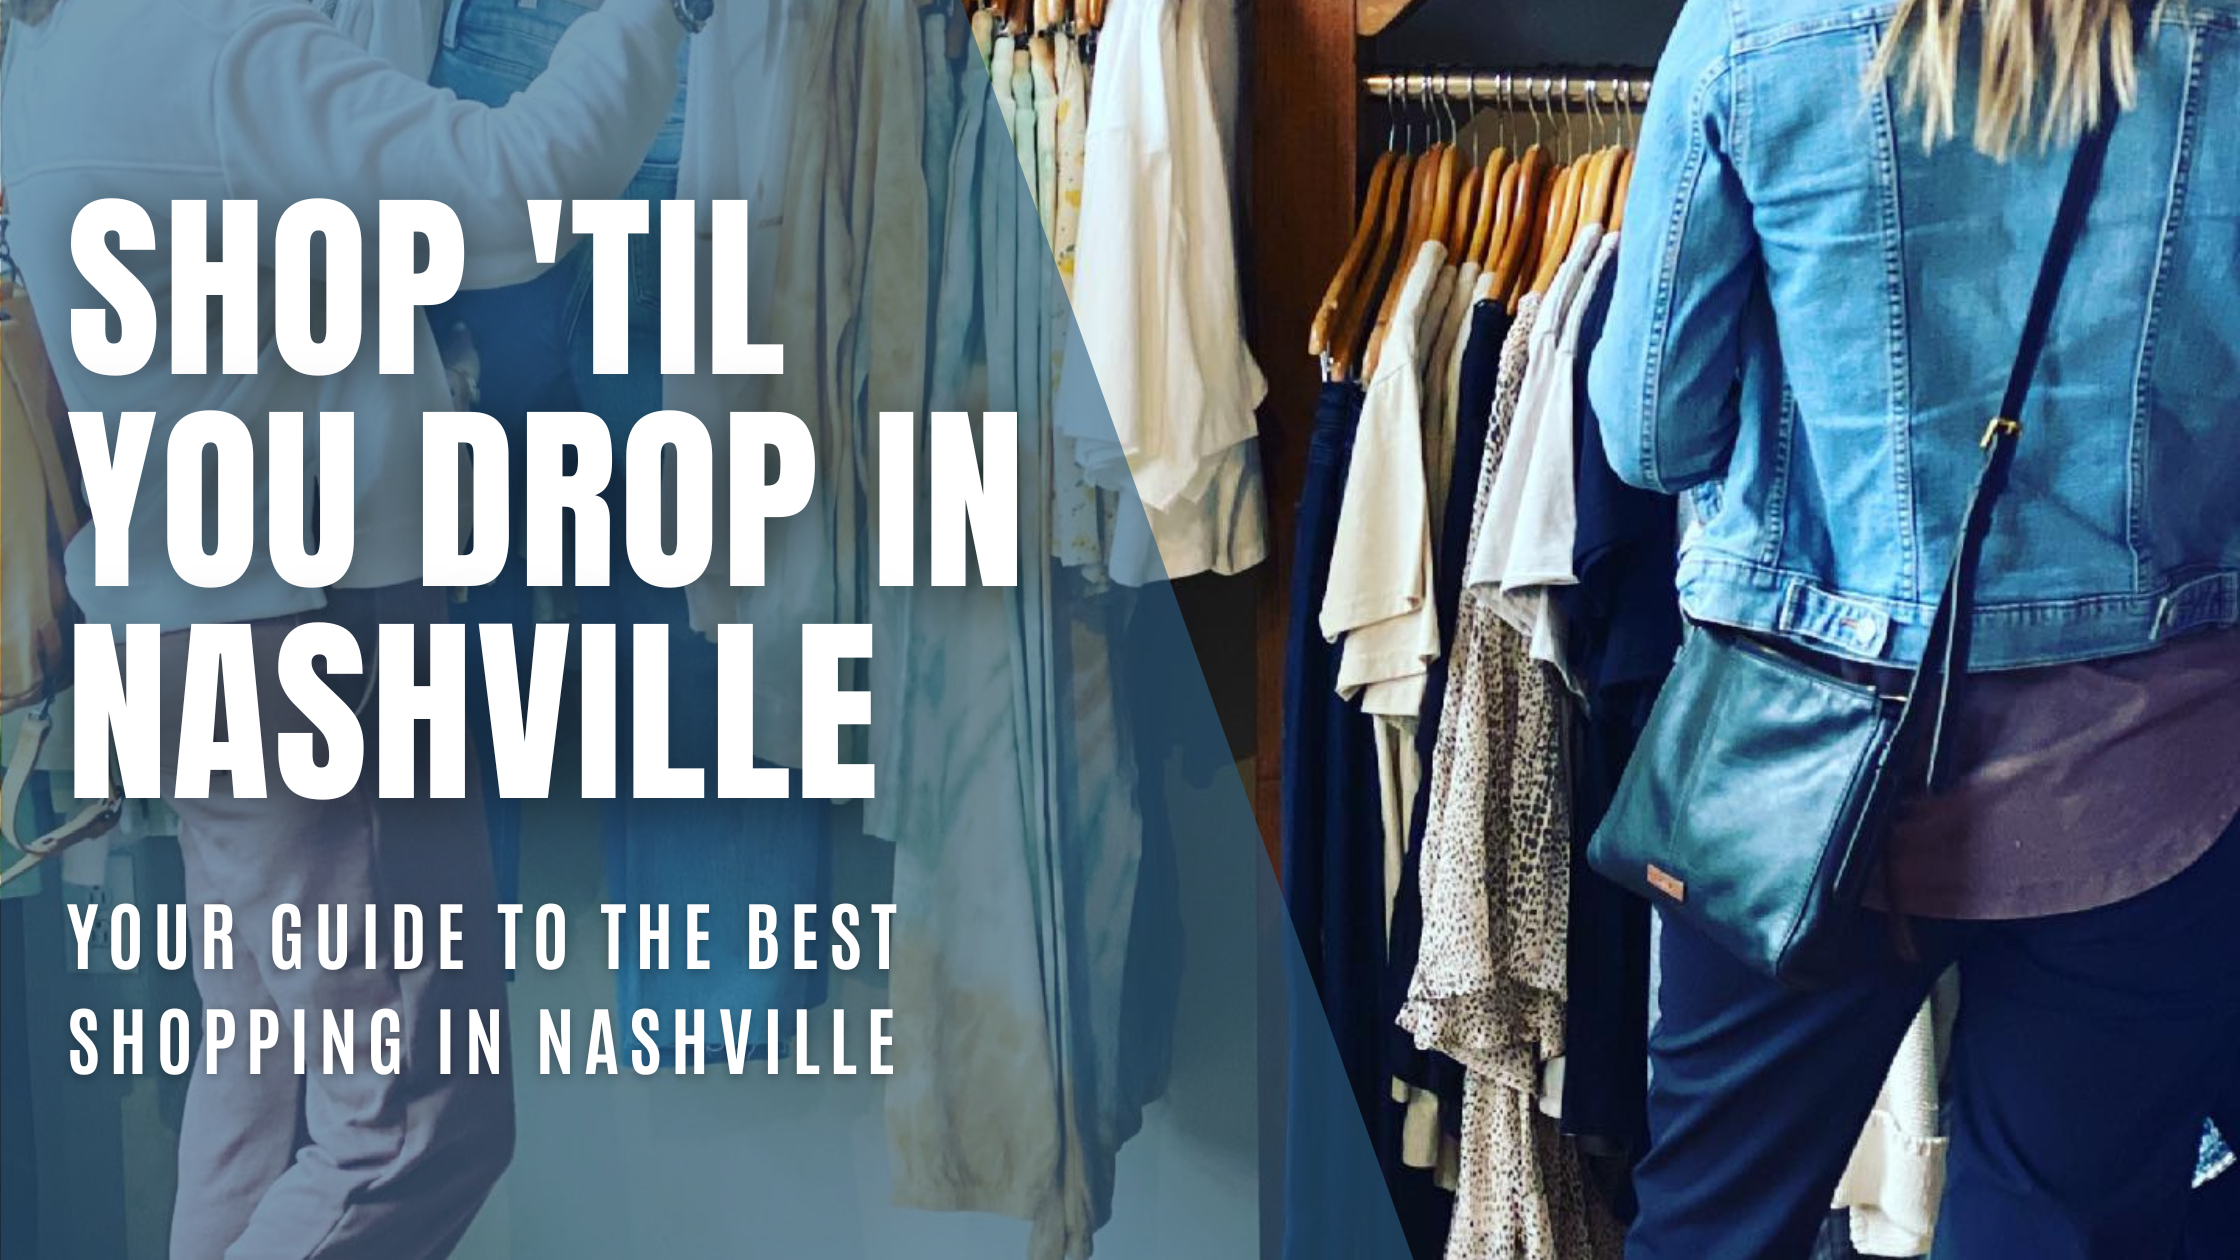 graphic that says shop 'til you drop in Nashville - your guide to the best shopping in nashville with an image of two women shopping in the background